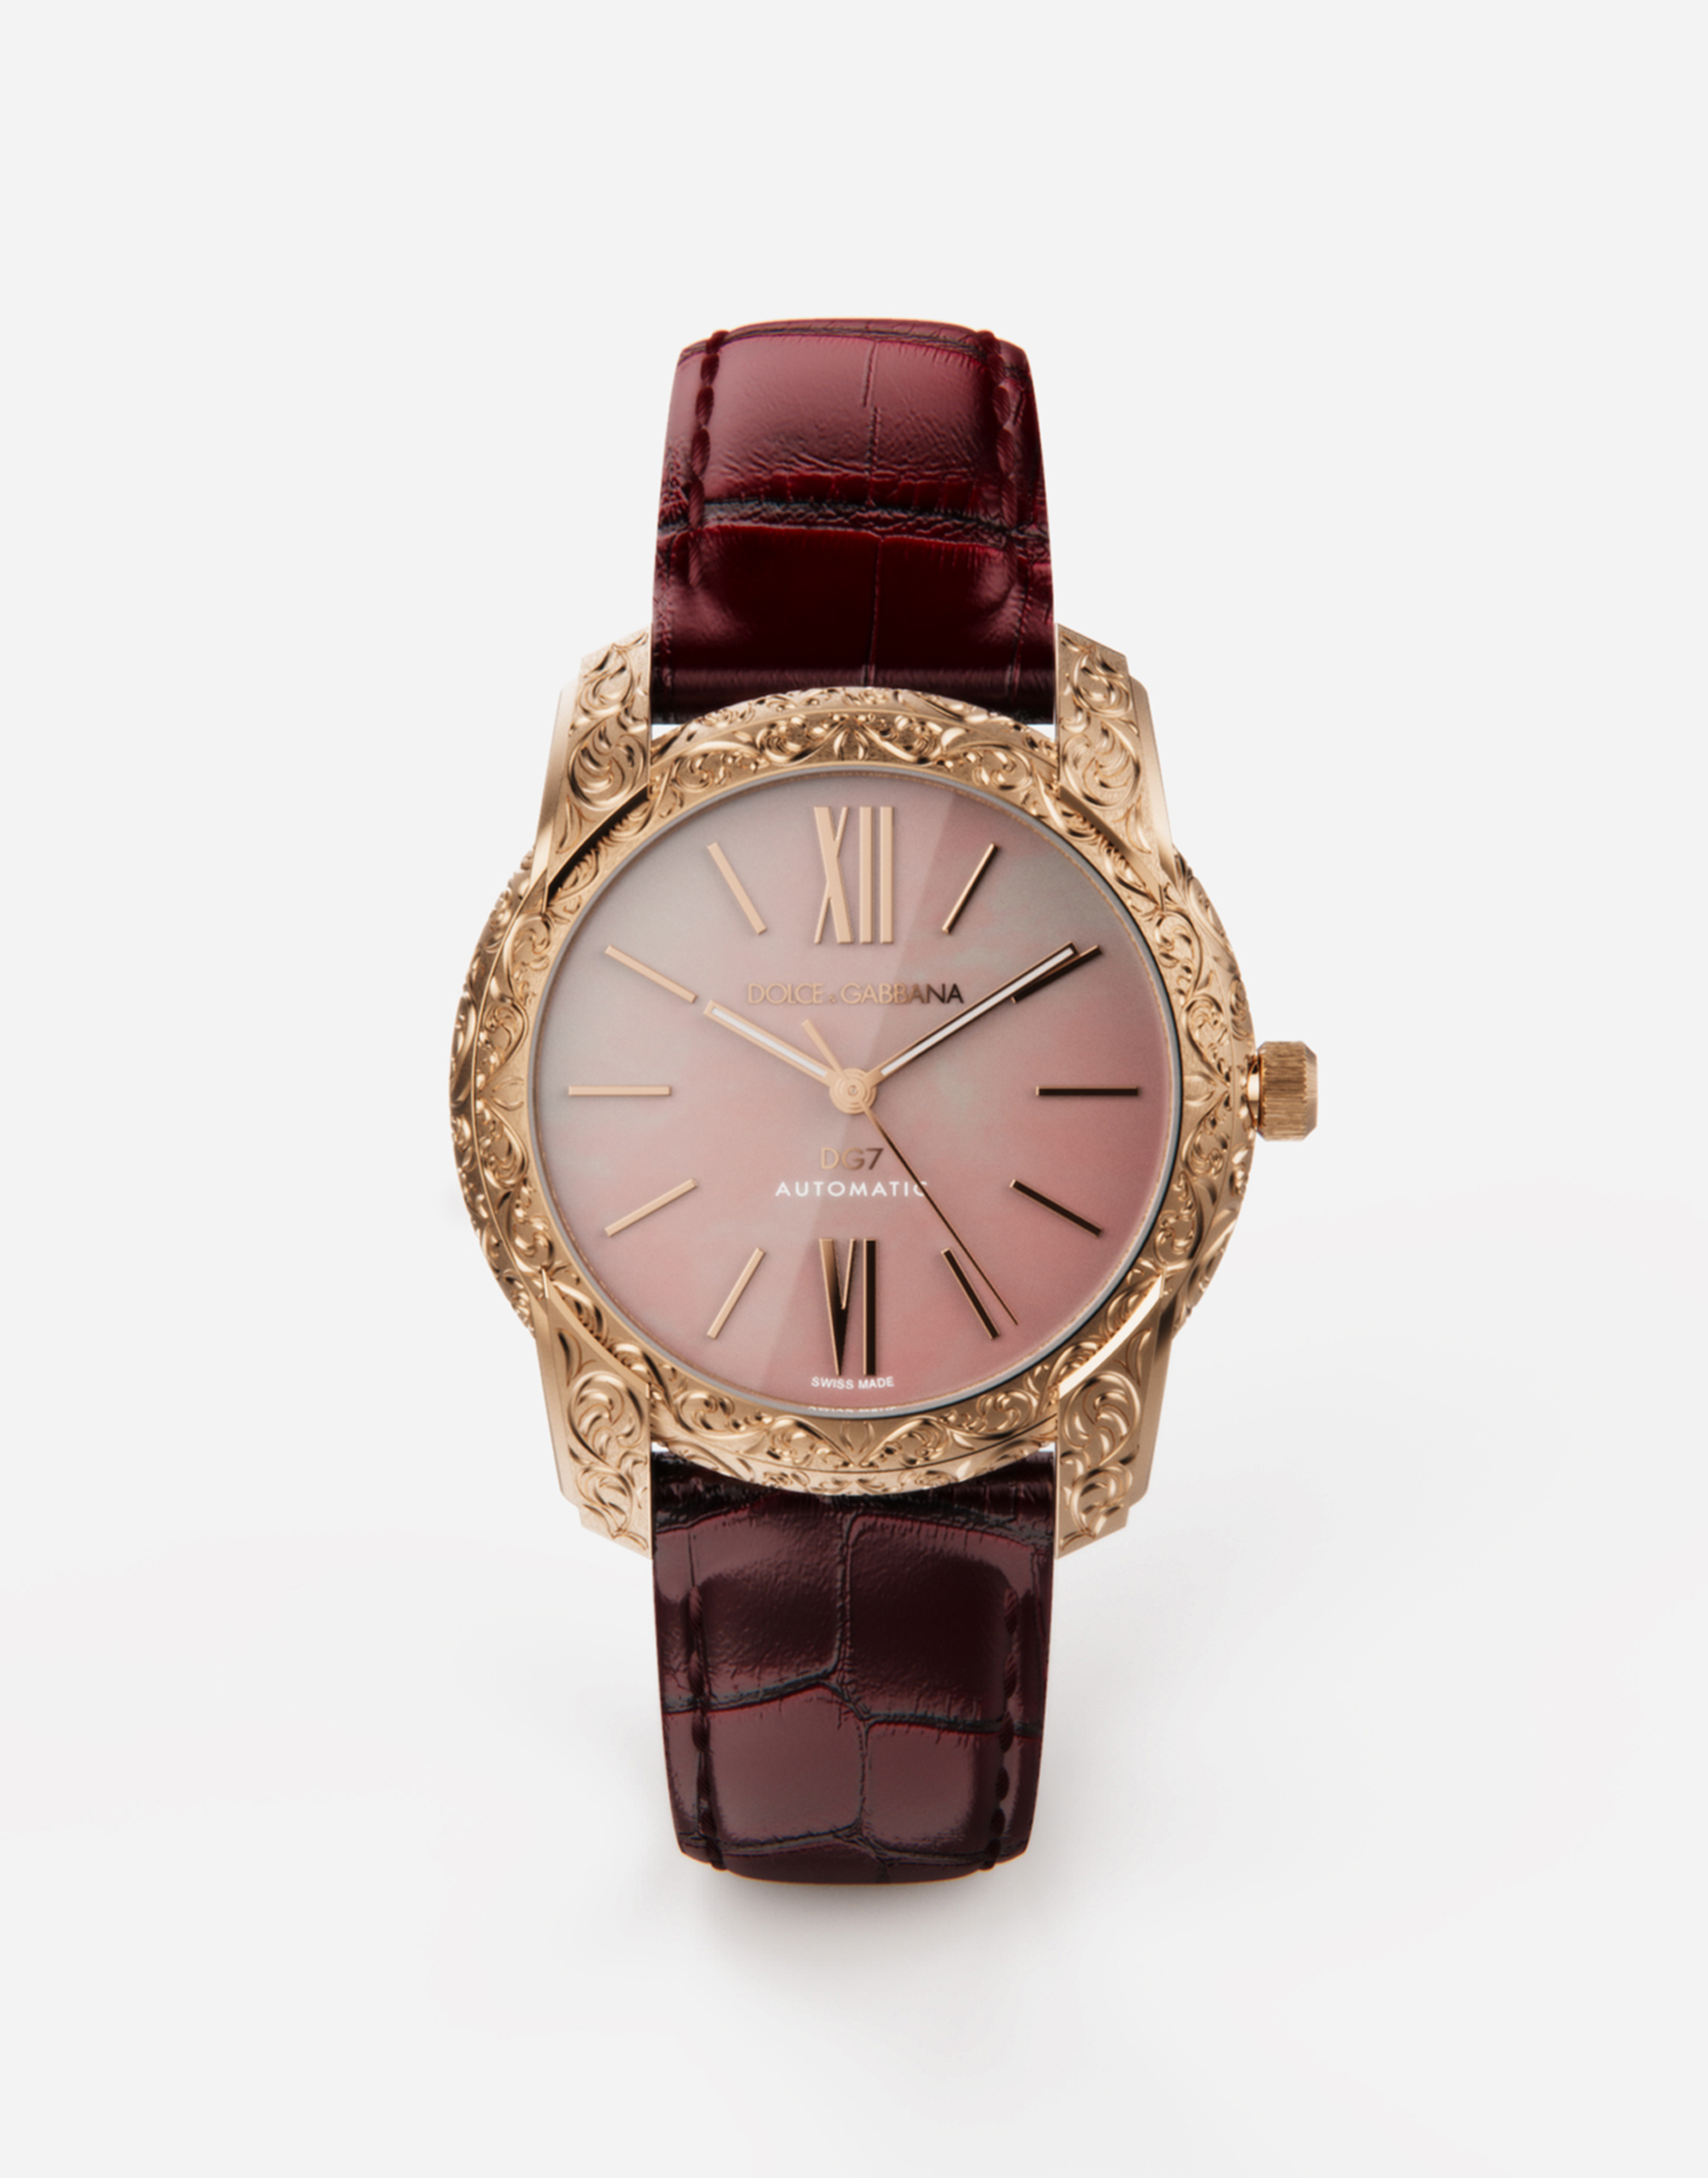 Dolce & Gabbana Dg7 Gattopardo Watch In Red Gold With Pink Mother Of Pearl In Burgundy